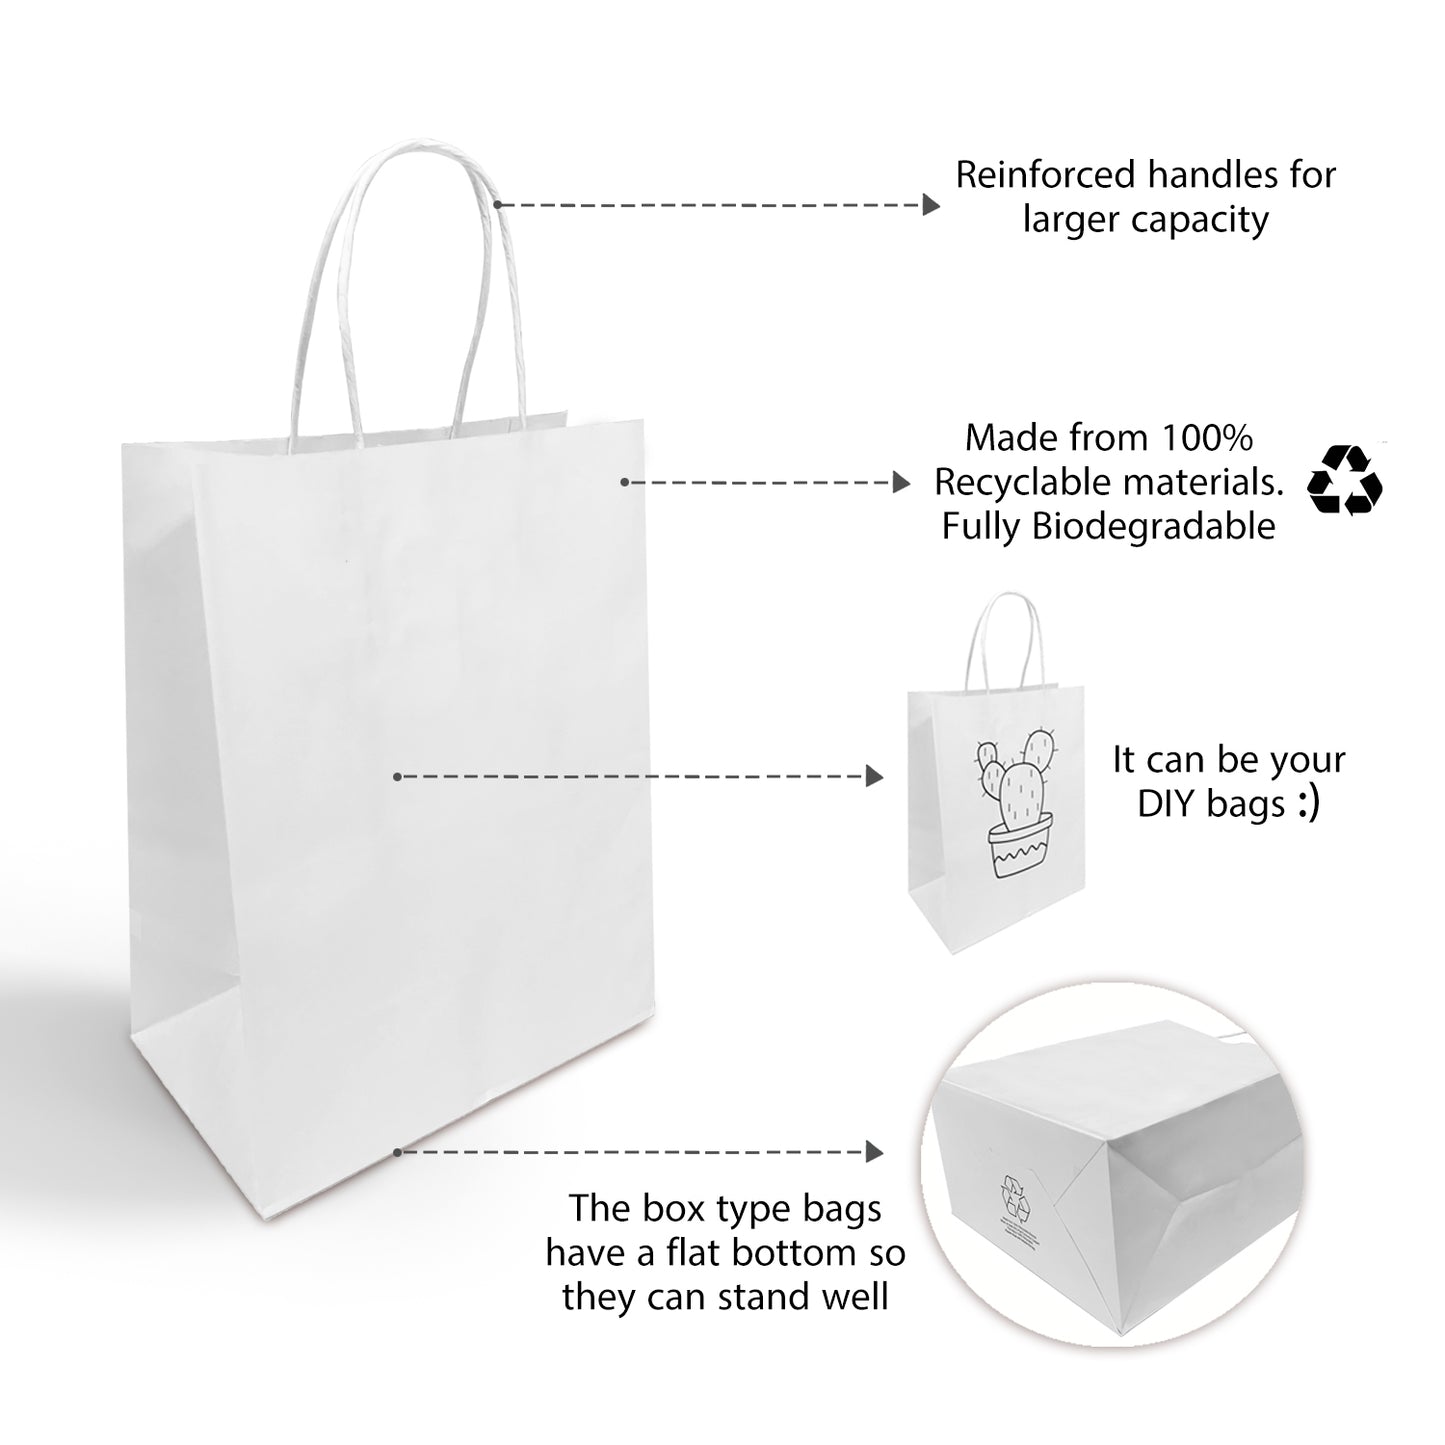 250 Pcs, Cub, 8x4.75x10.25 inches, White Kraft Paper Bags, with Twisted Handle